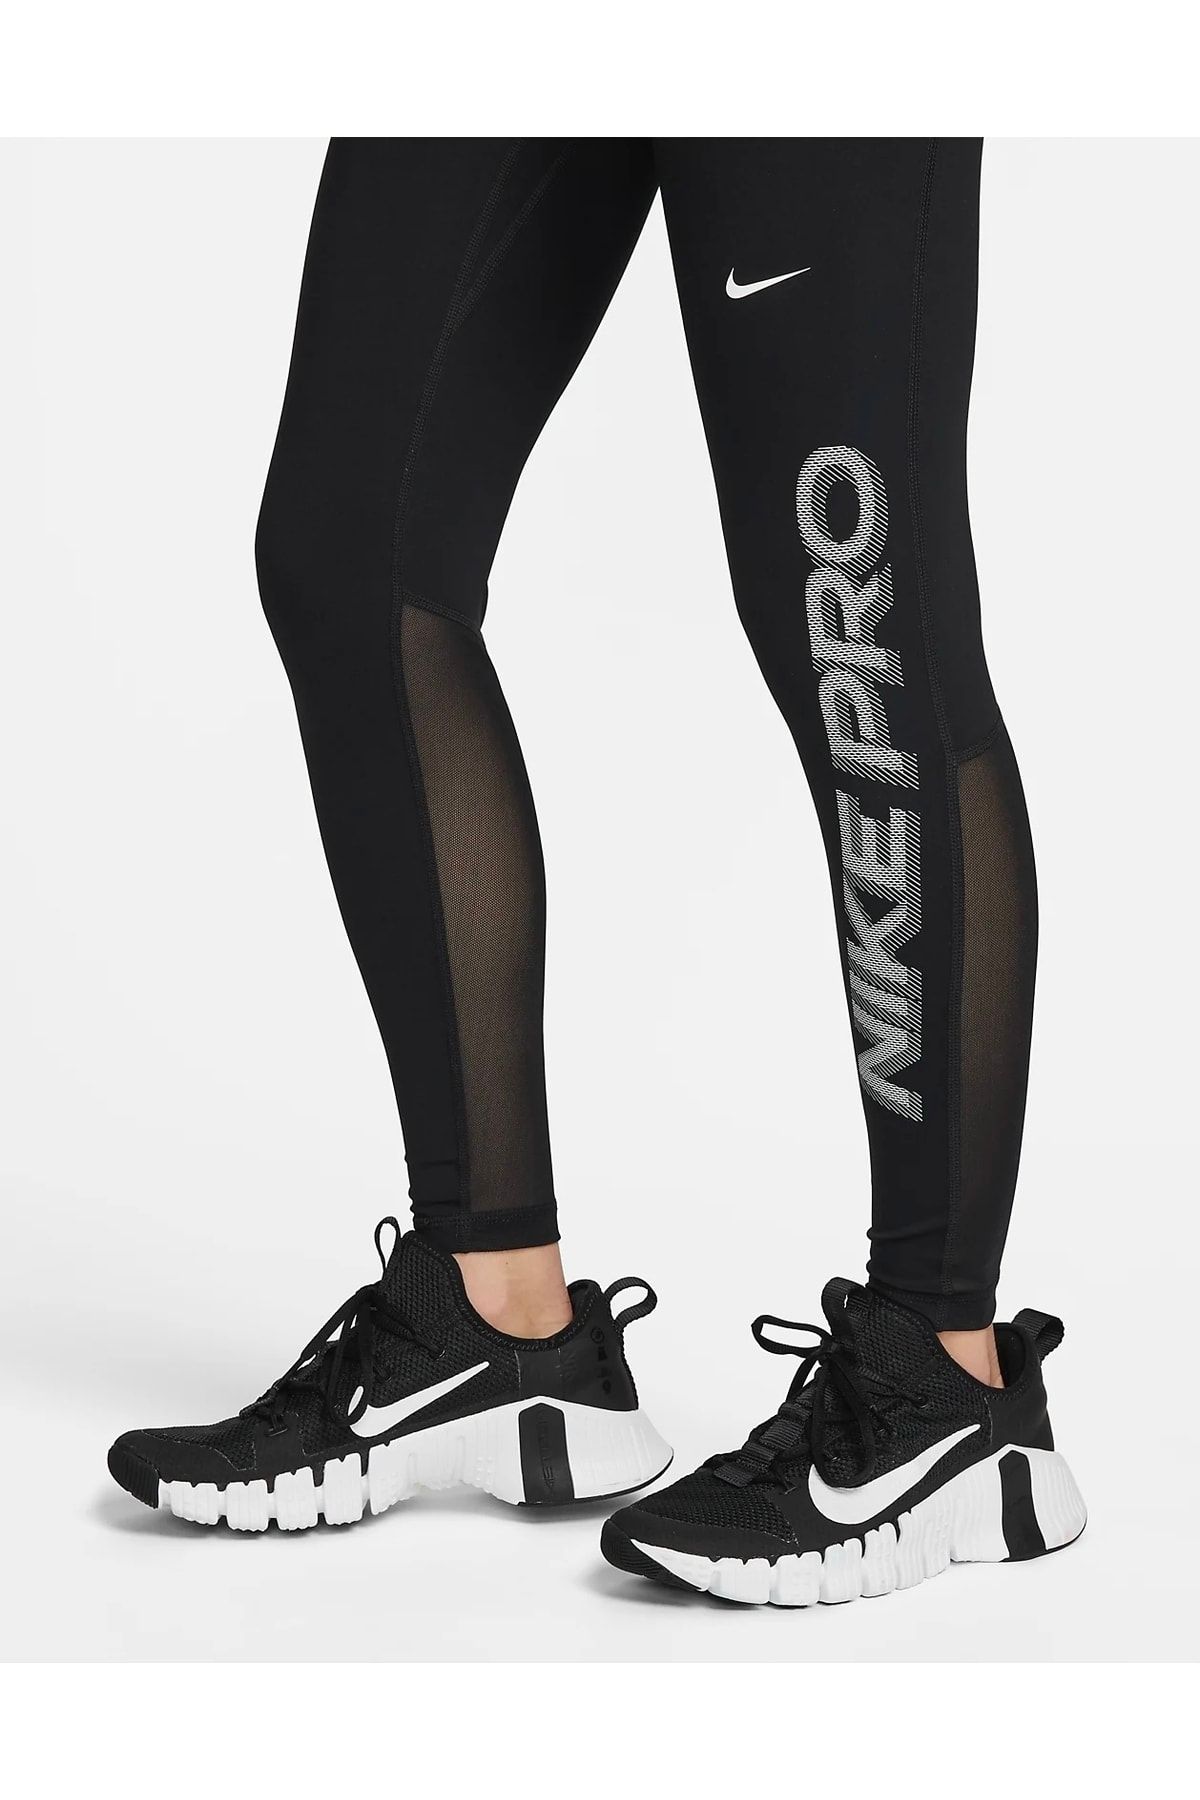 NIKE PRO DRI FIT GRAPHIC TRAINING GYM WORKOUT TIGHTS BLACK DR7741-010 WOMEN  S